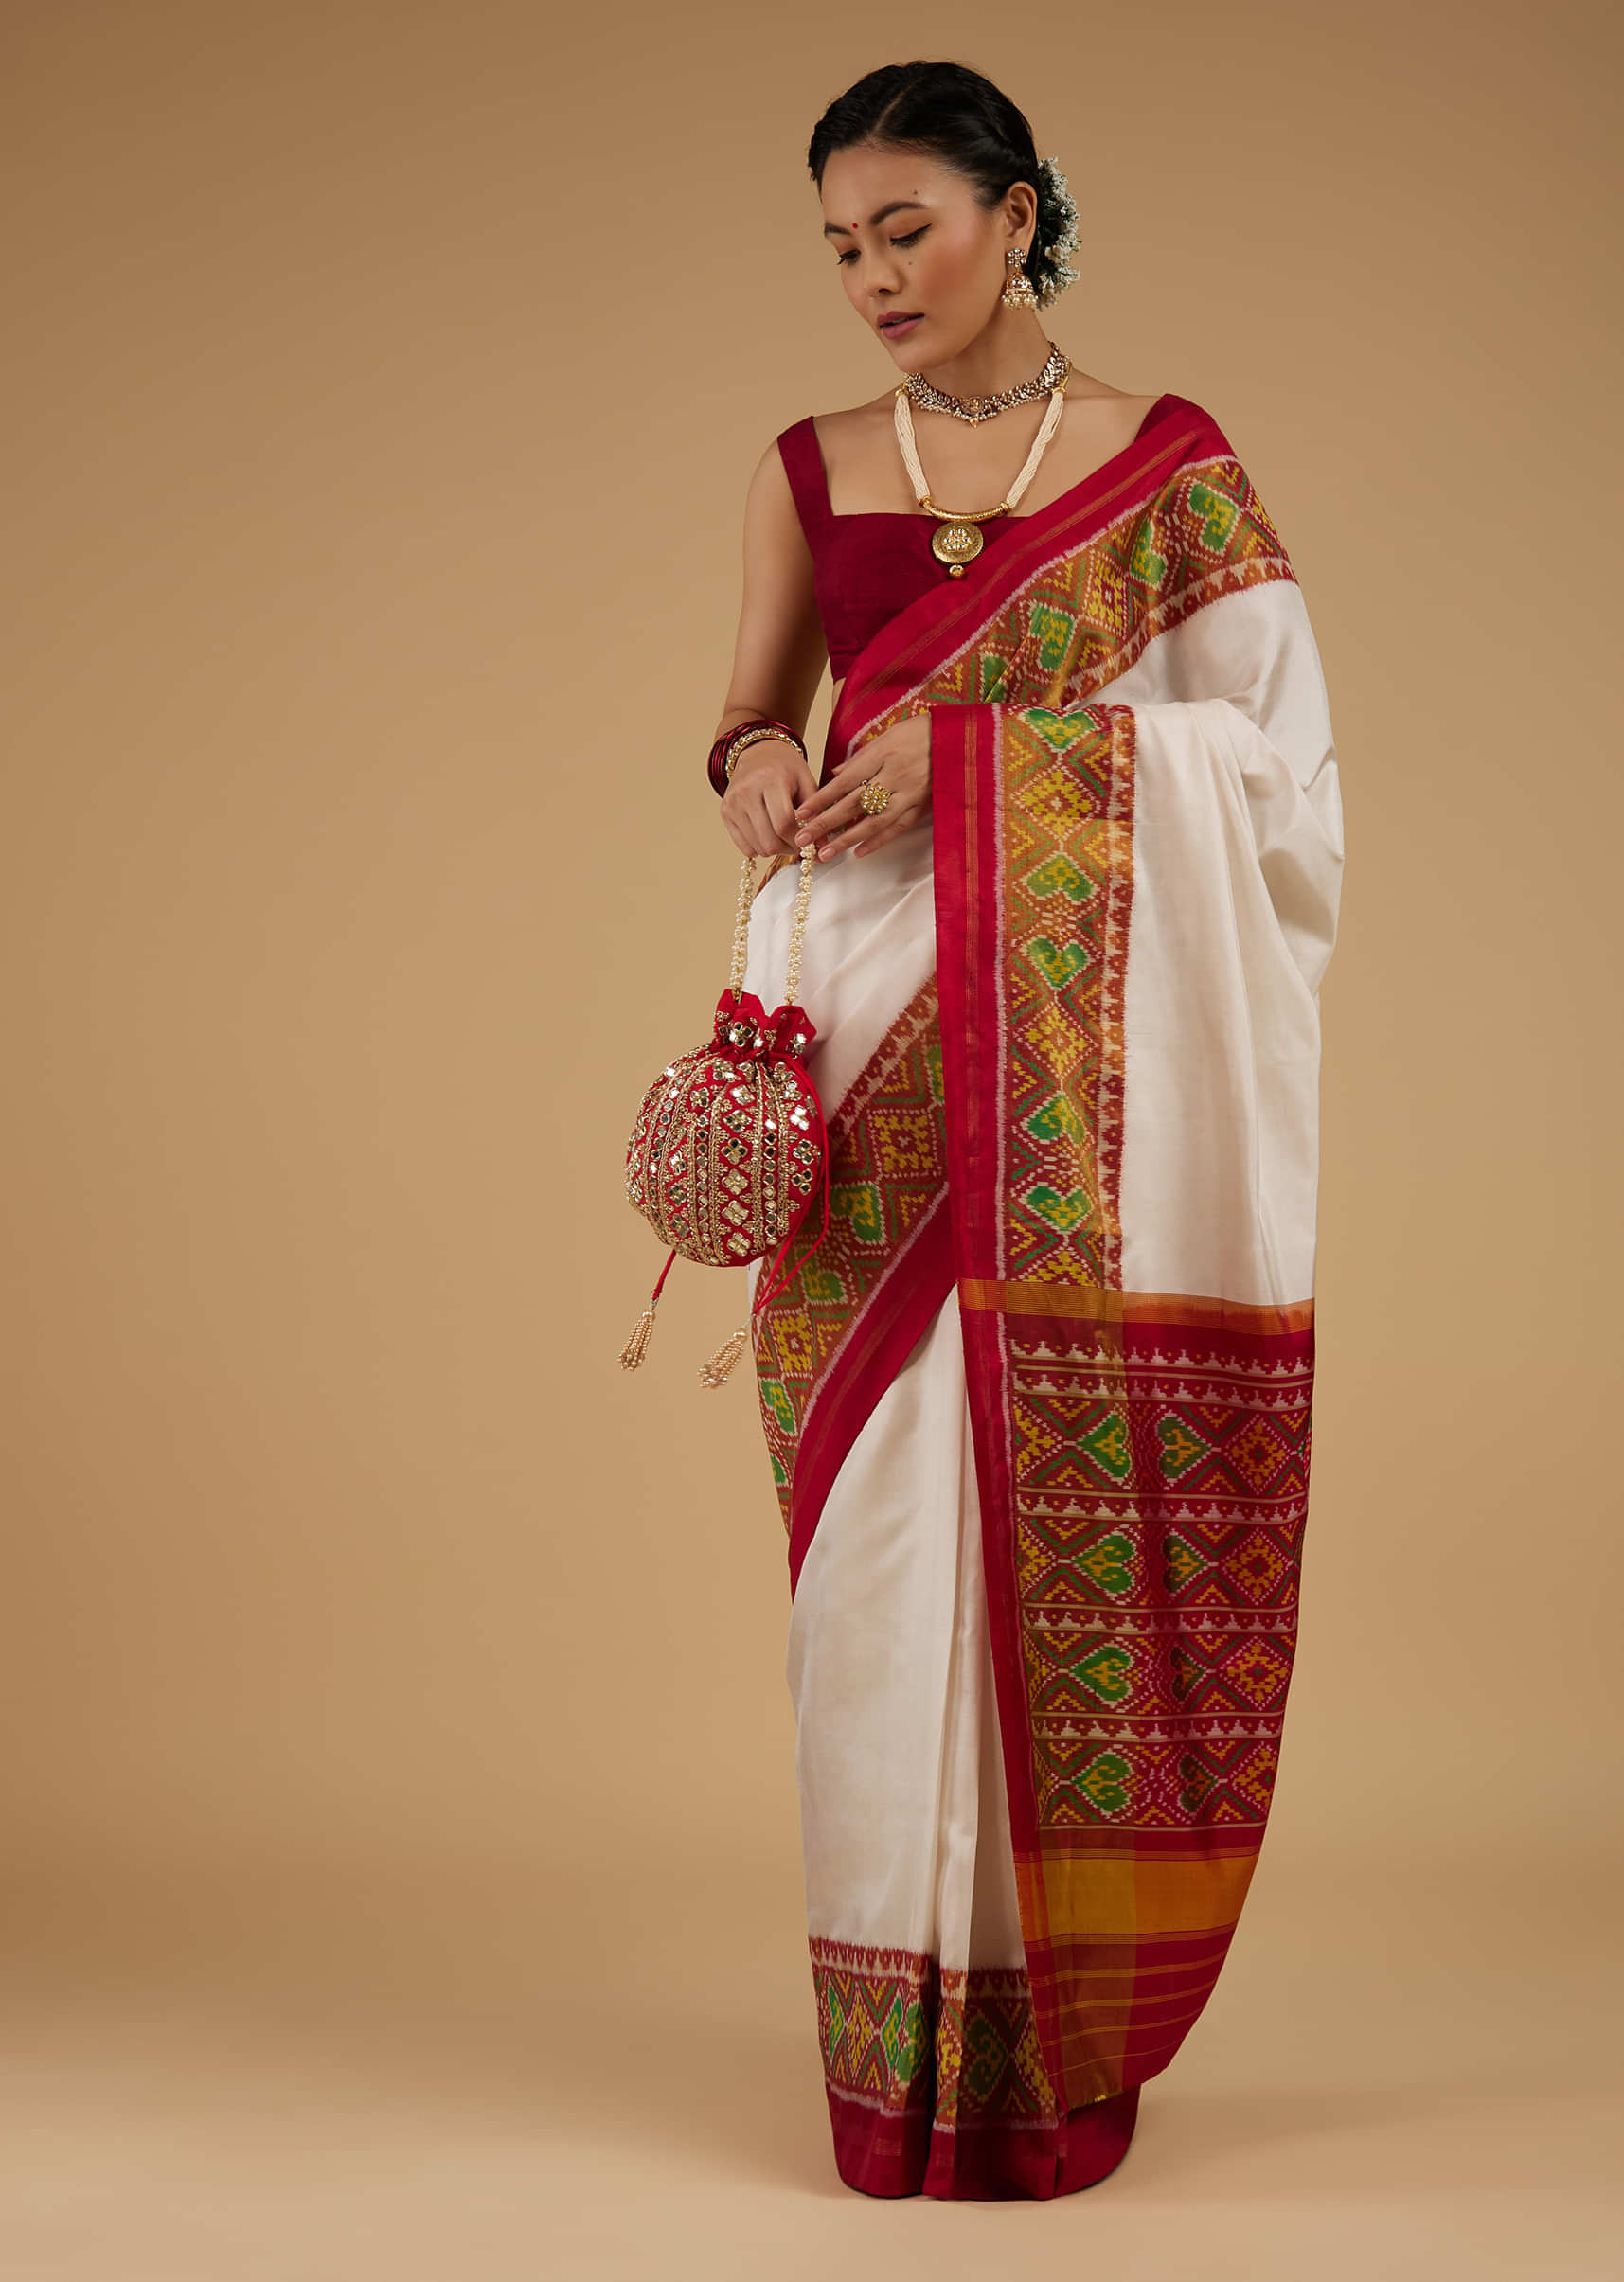 Pearl White Saree In Silk With Ikat Weave Patola Work